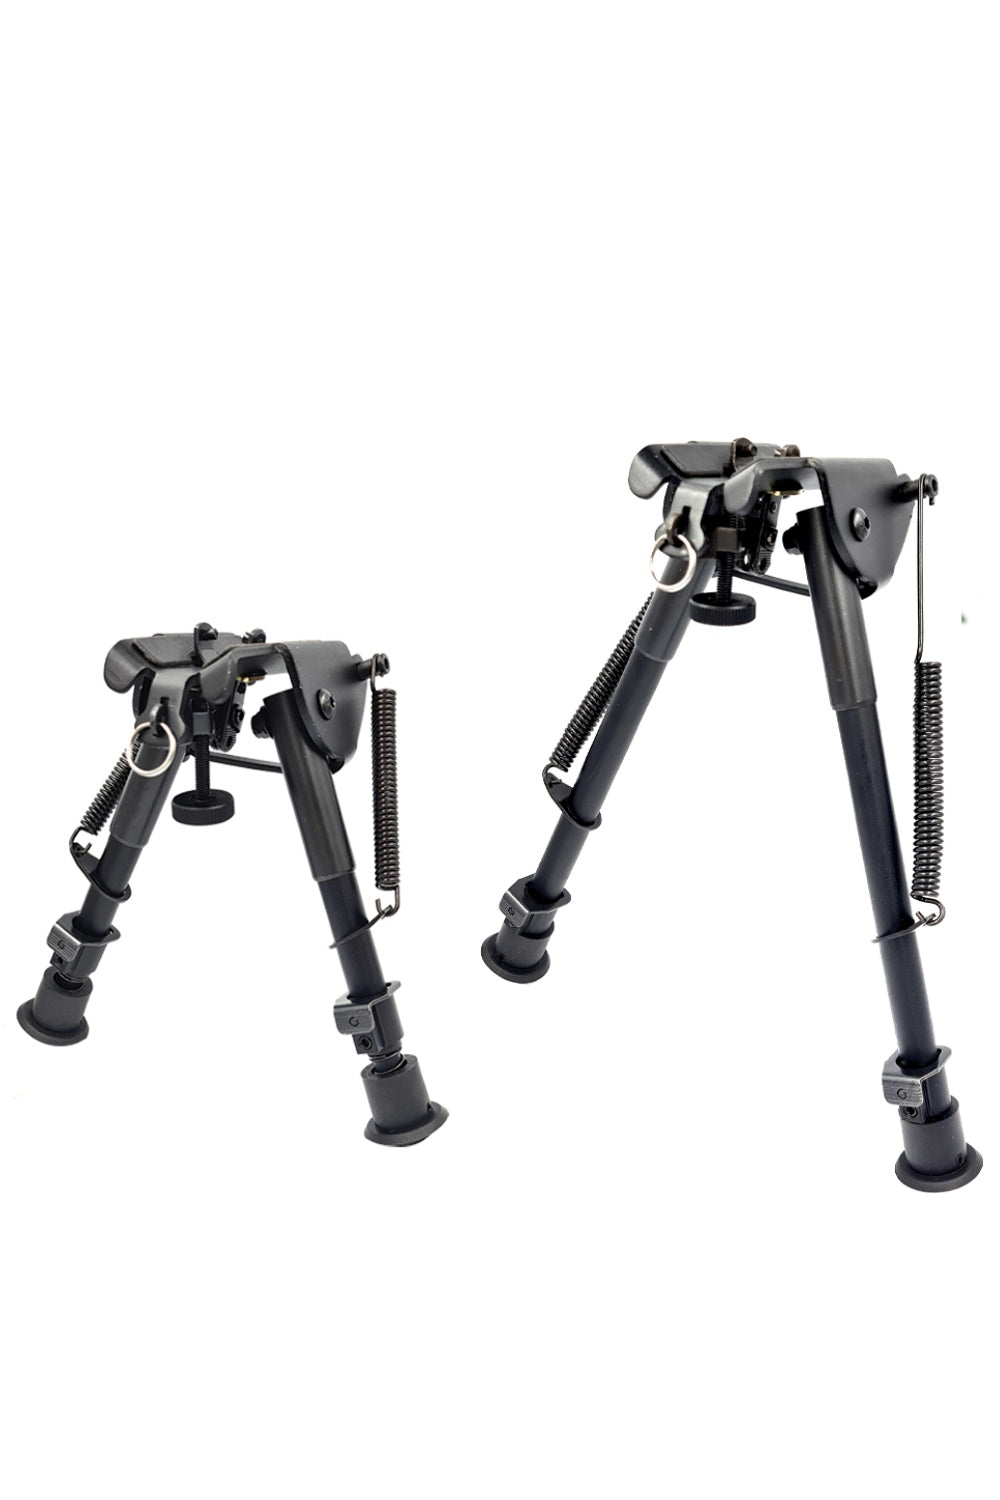 Bisley Rifle Bipod Fixed In 6-9 inch and 9-14 inch